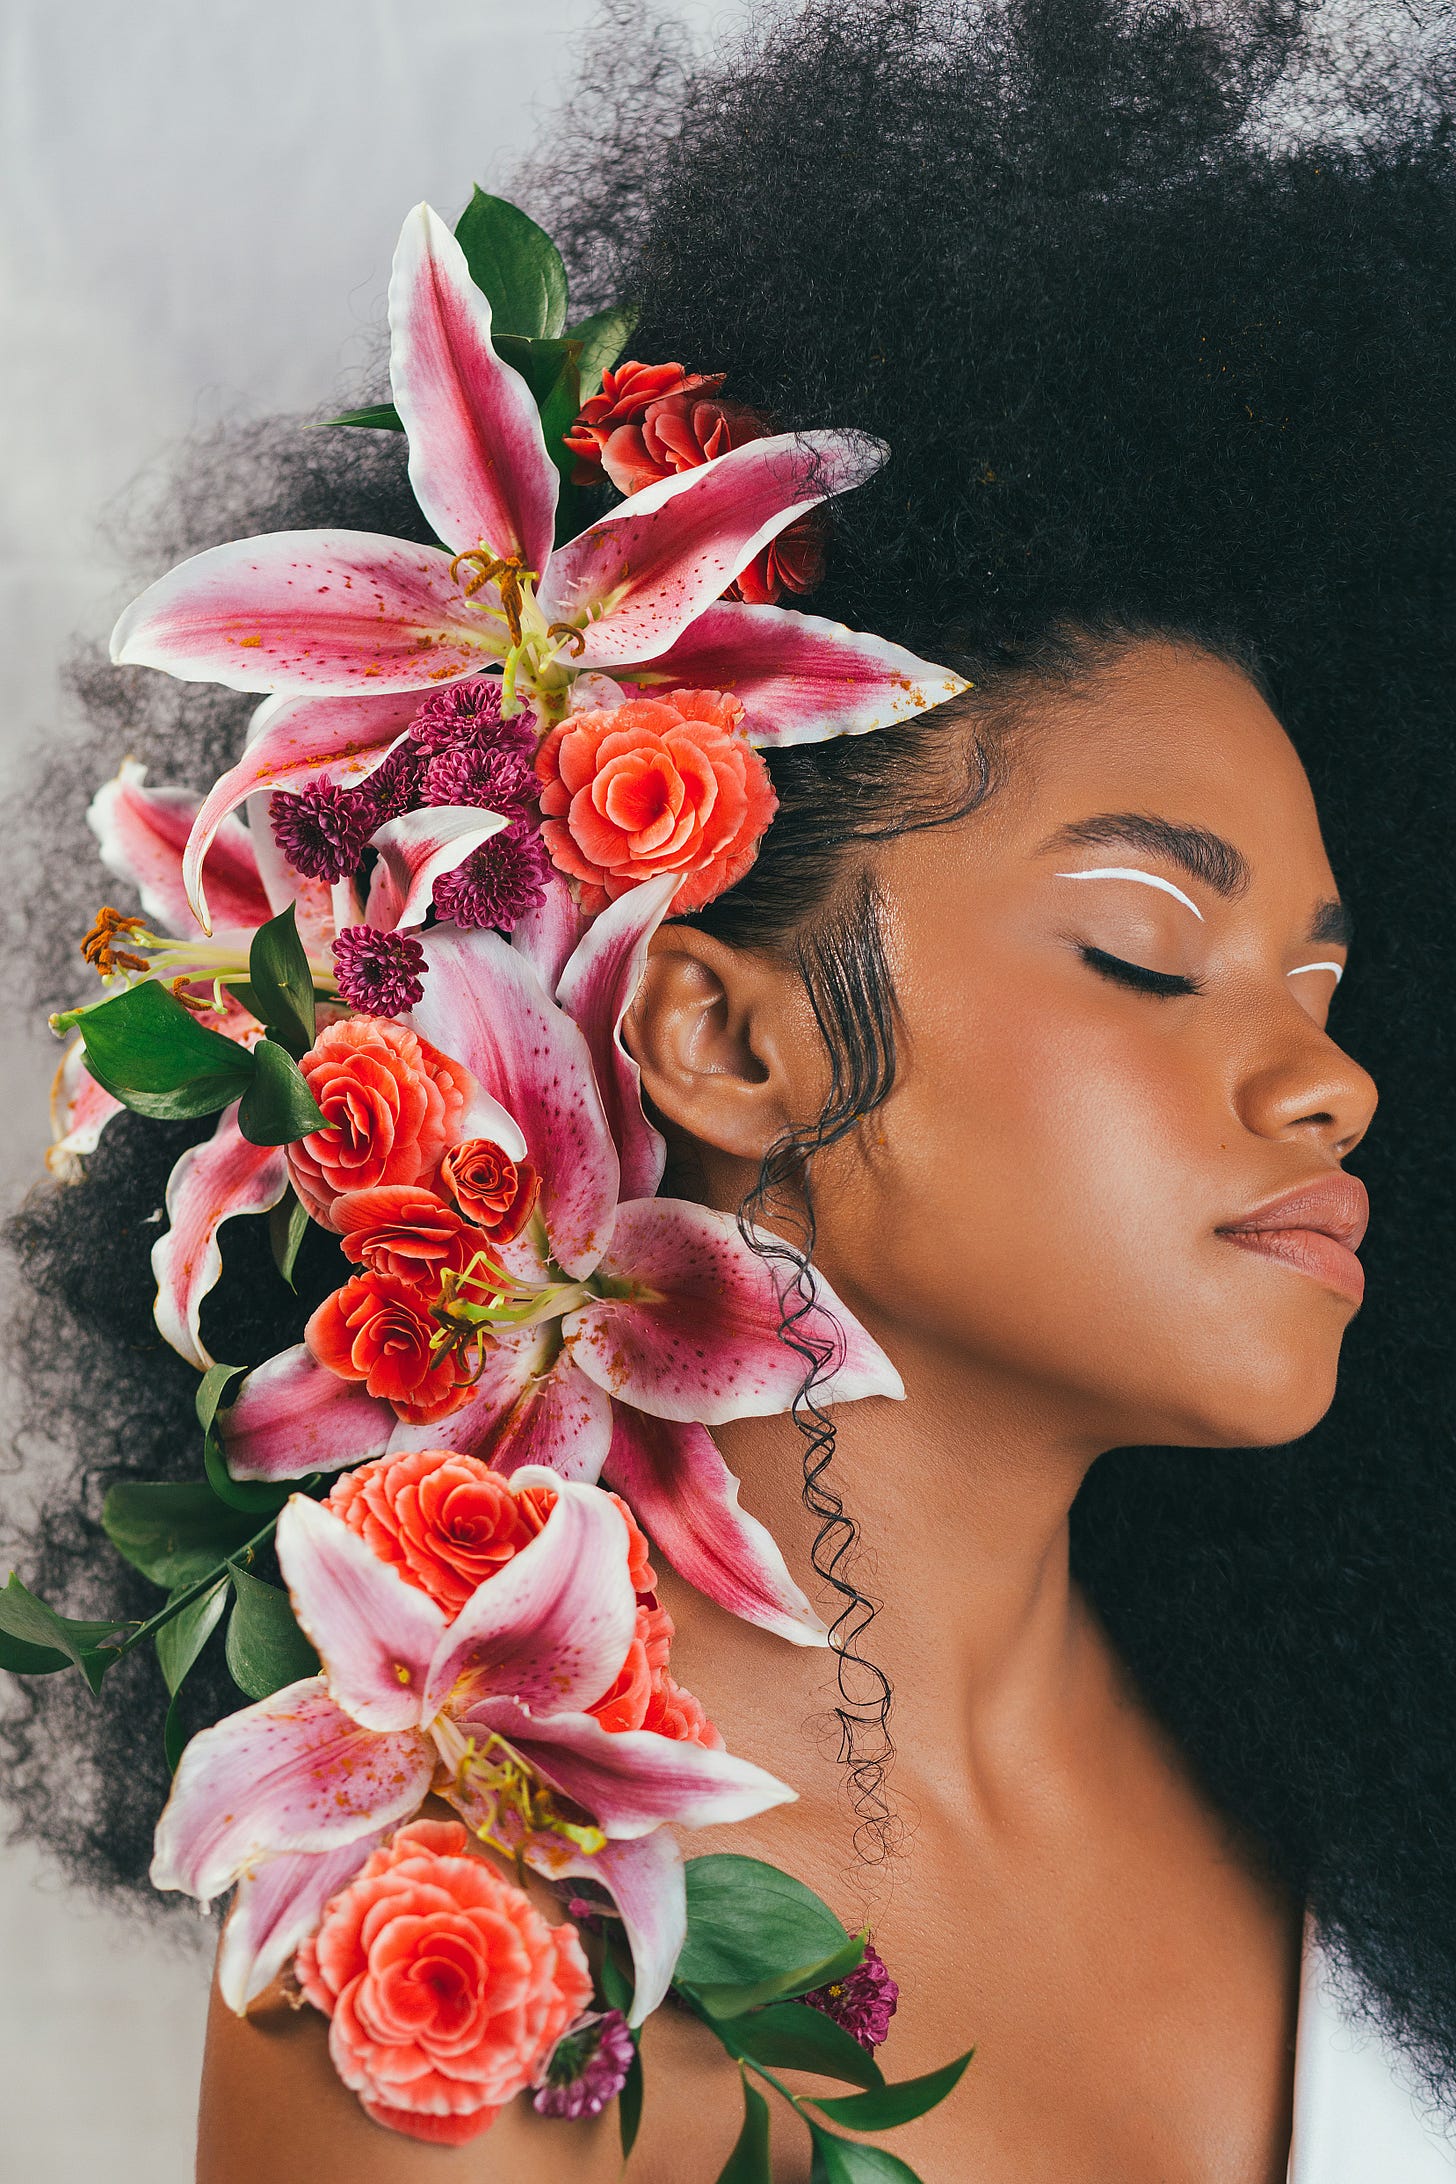 A light gray background behind a Black woman with warm brown skin. She has dark natural hair that is full and to one side. She has colorful tropical flowers trailing down over her shoulder on the other side. Her eyes are closed and she has a white line on her eyelid between her eyebrow and lashline.